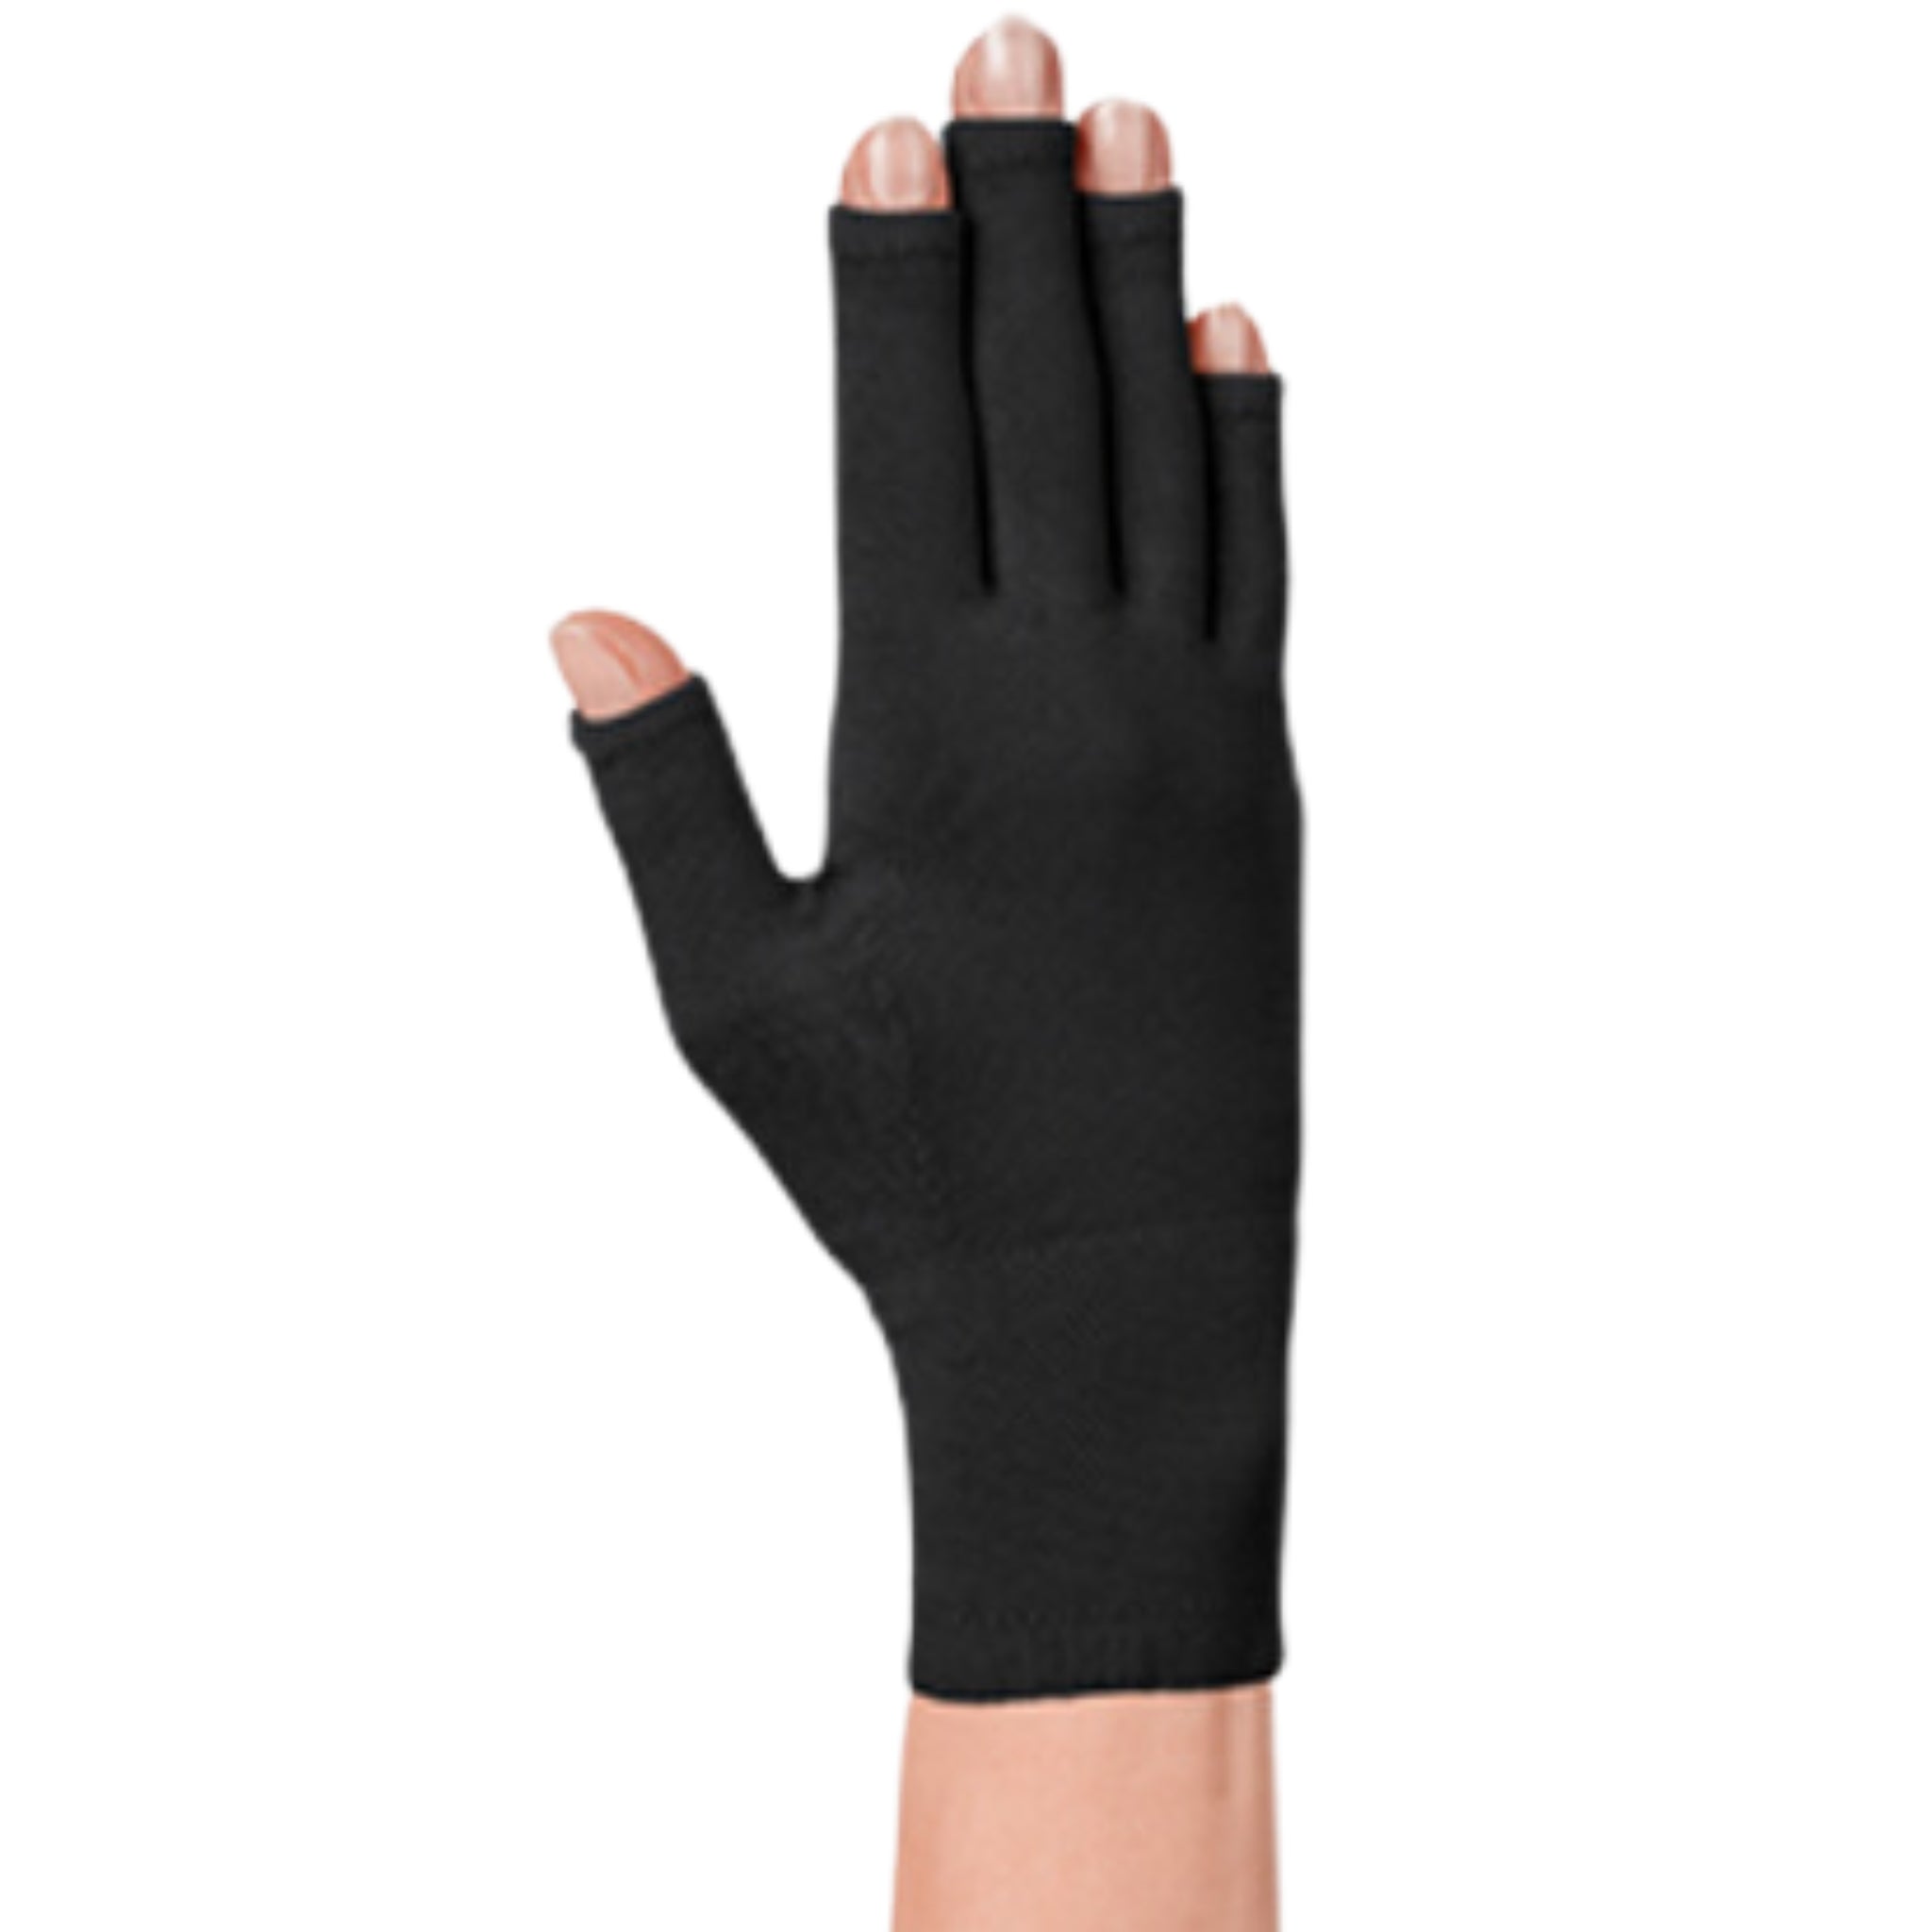 mediven® harmony Seamless Glove with Open Fingers